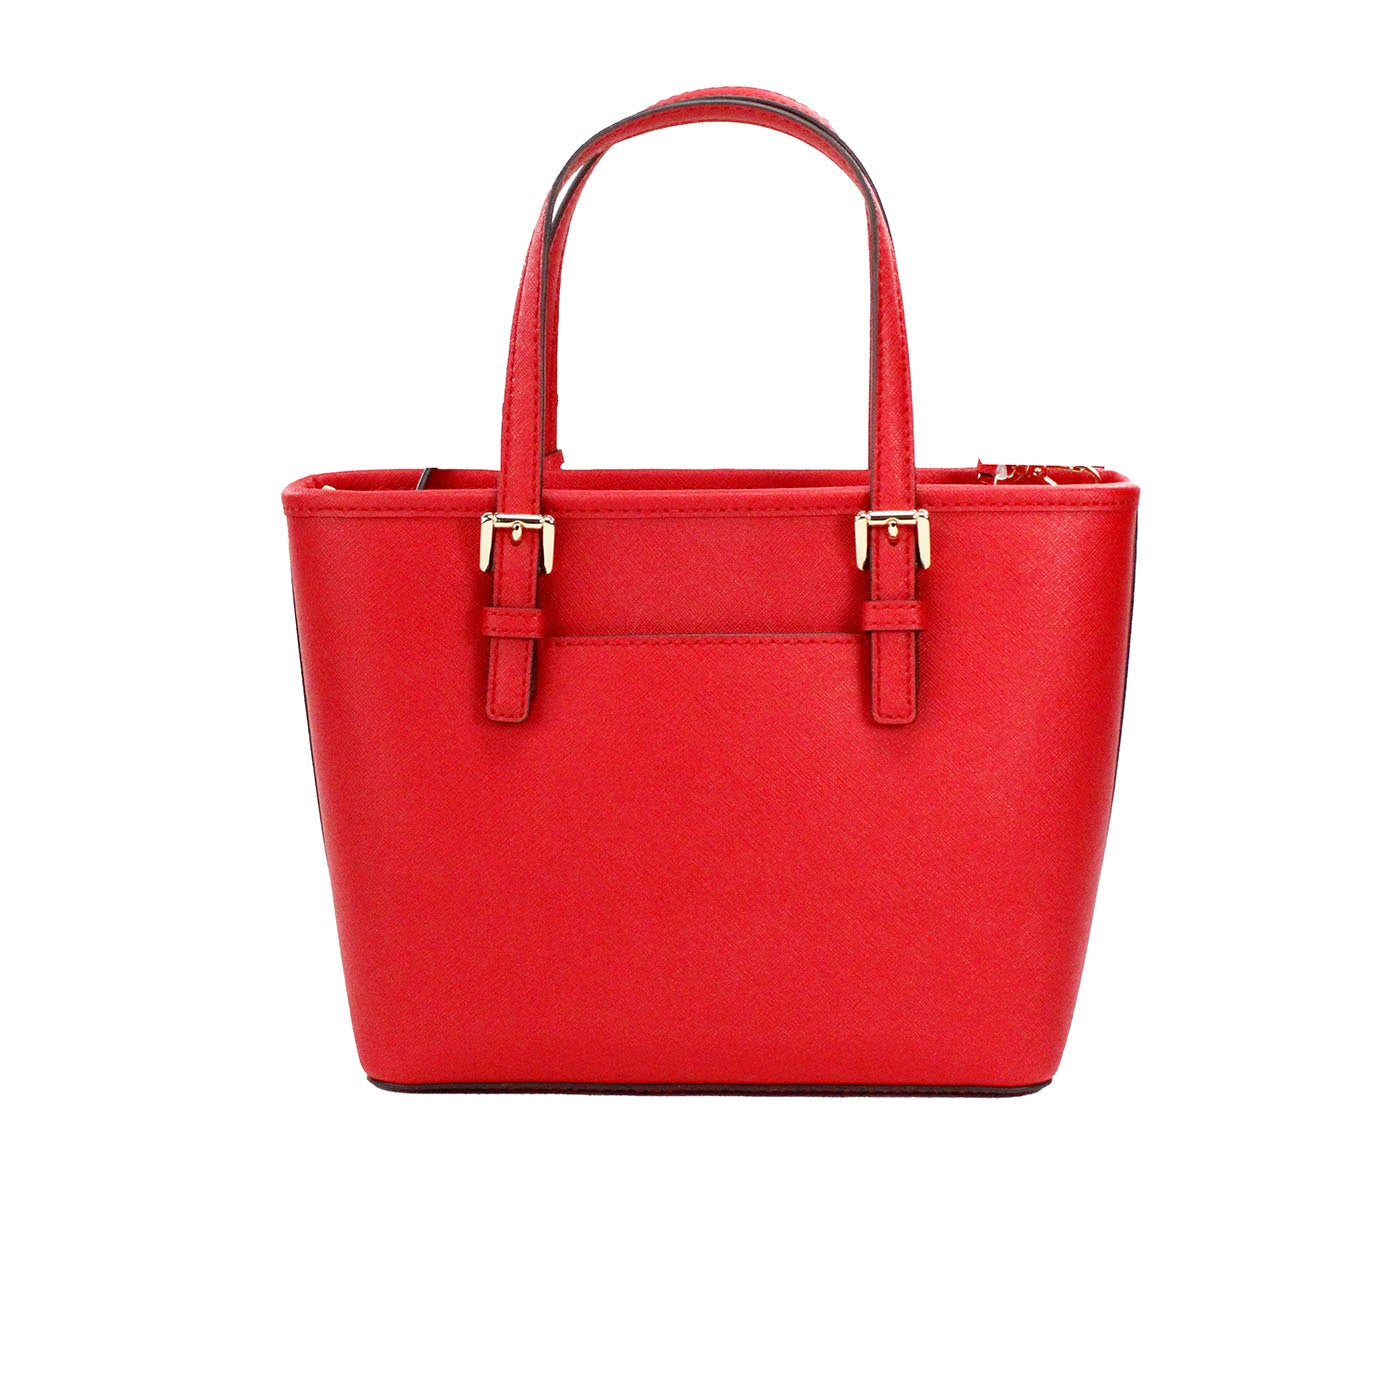 Jet Set Bright Red Leather XS Carryall Top Zip Tote Bag Purse